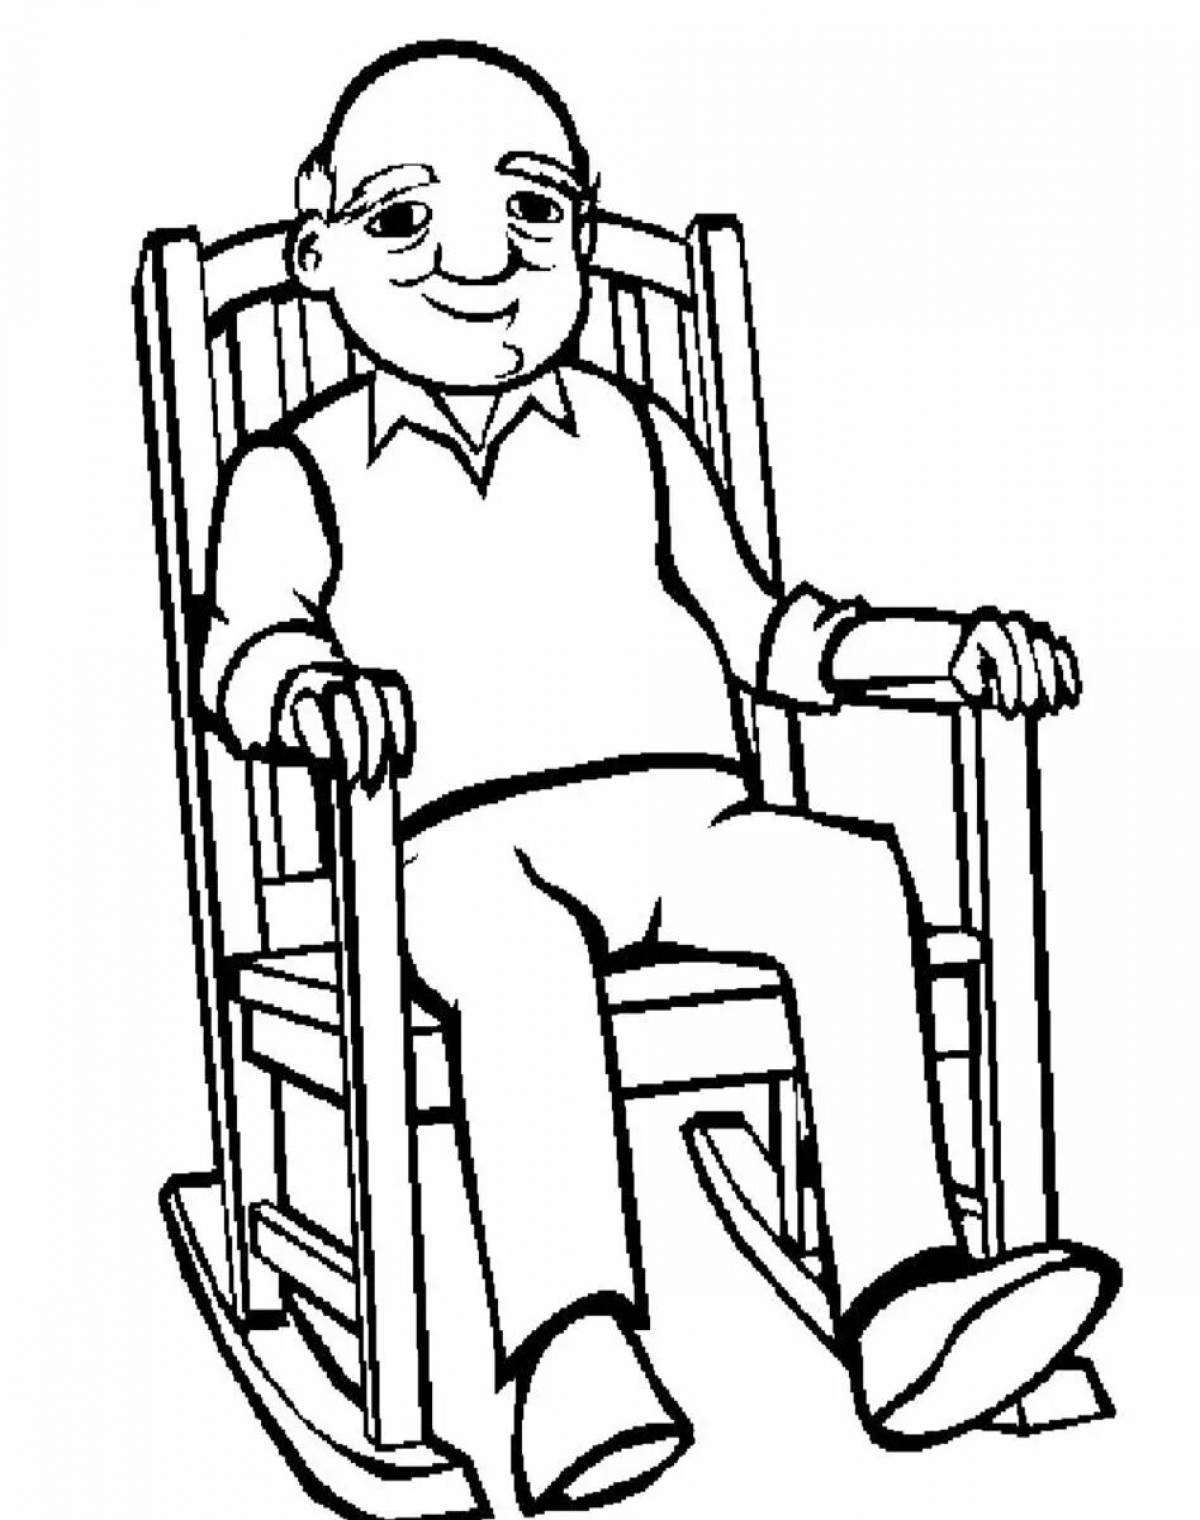 Amazing grandfather coloring page for kids